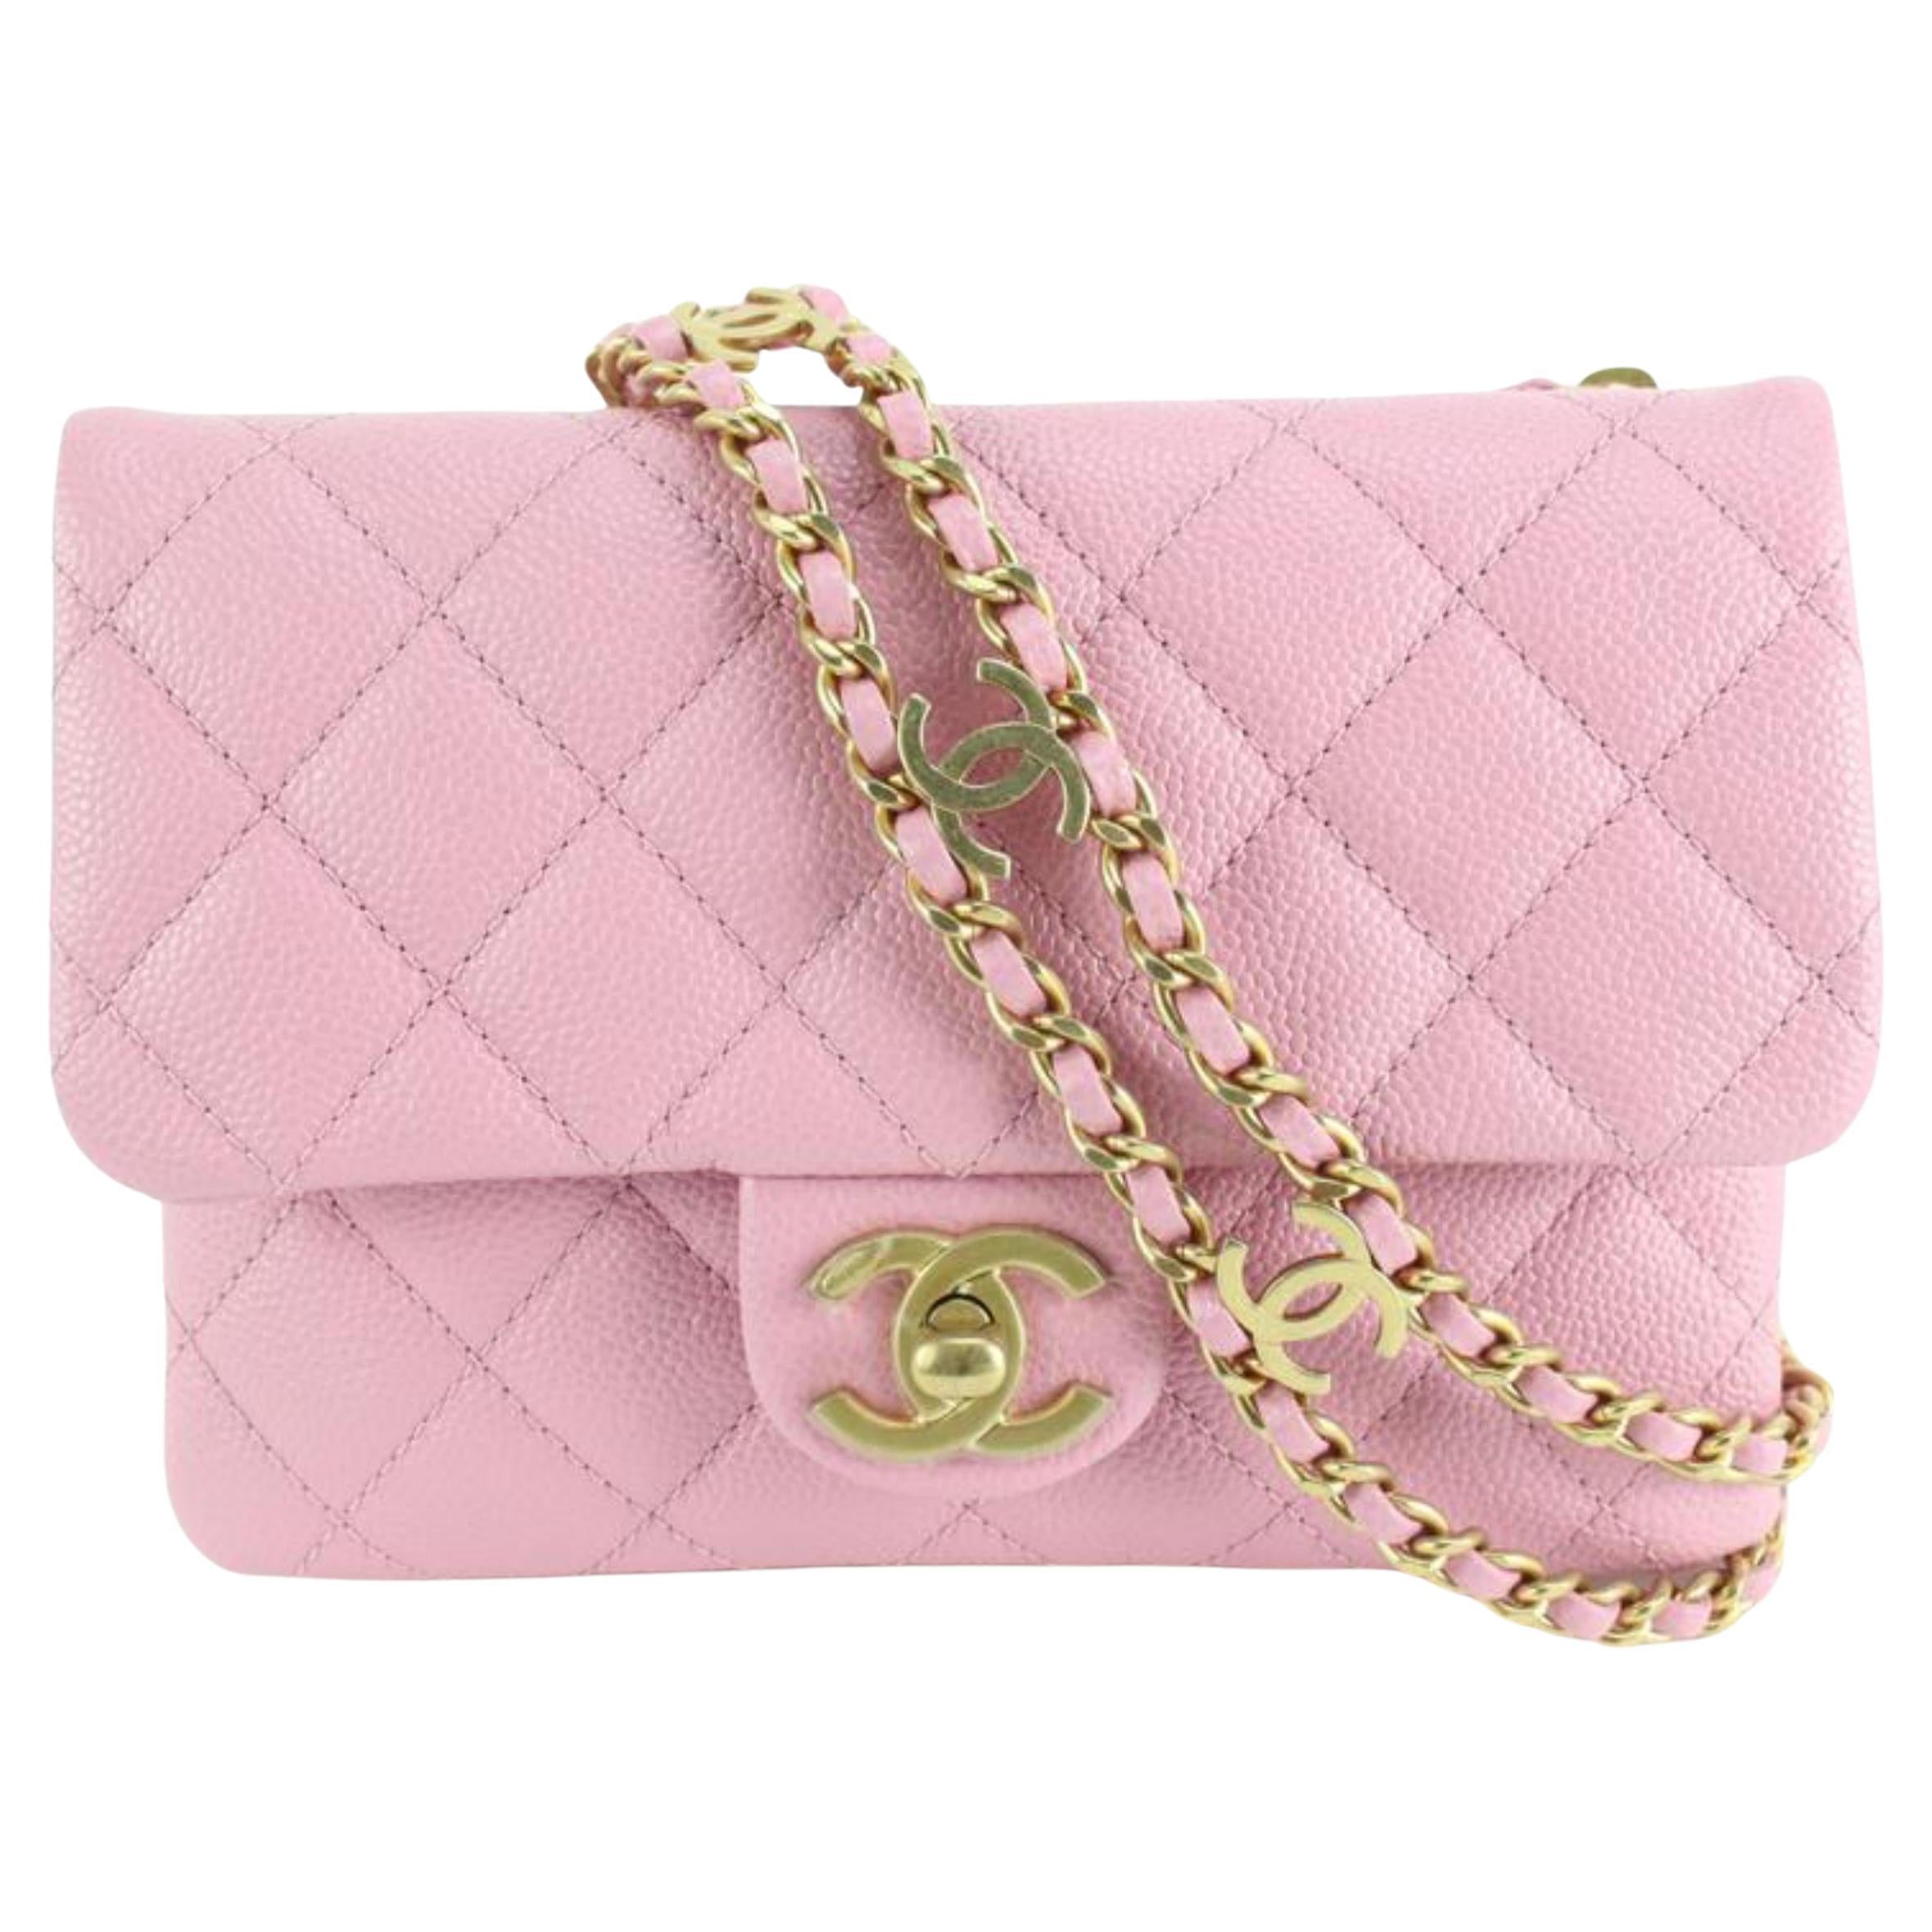 Chanel 22S Dark Pink Quilted Caviar Mini Flap Gold Chain Bag 7cz53s